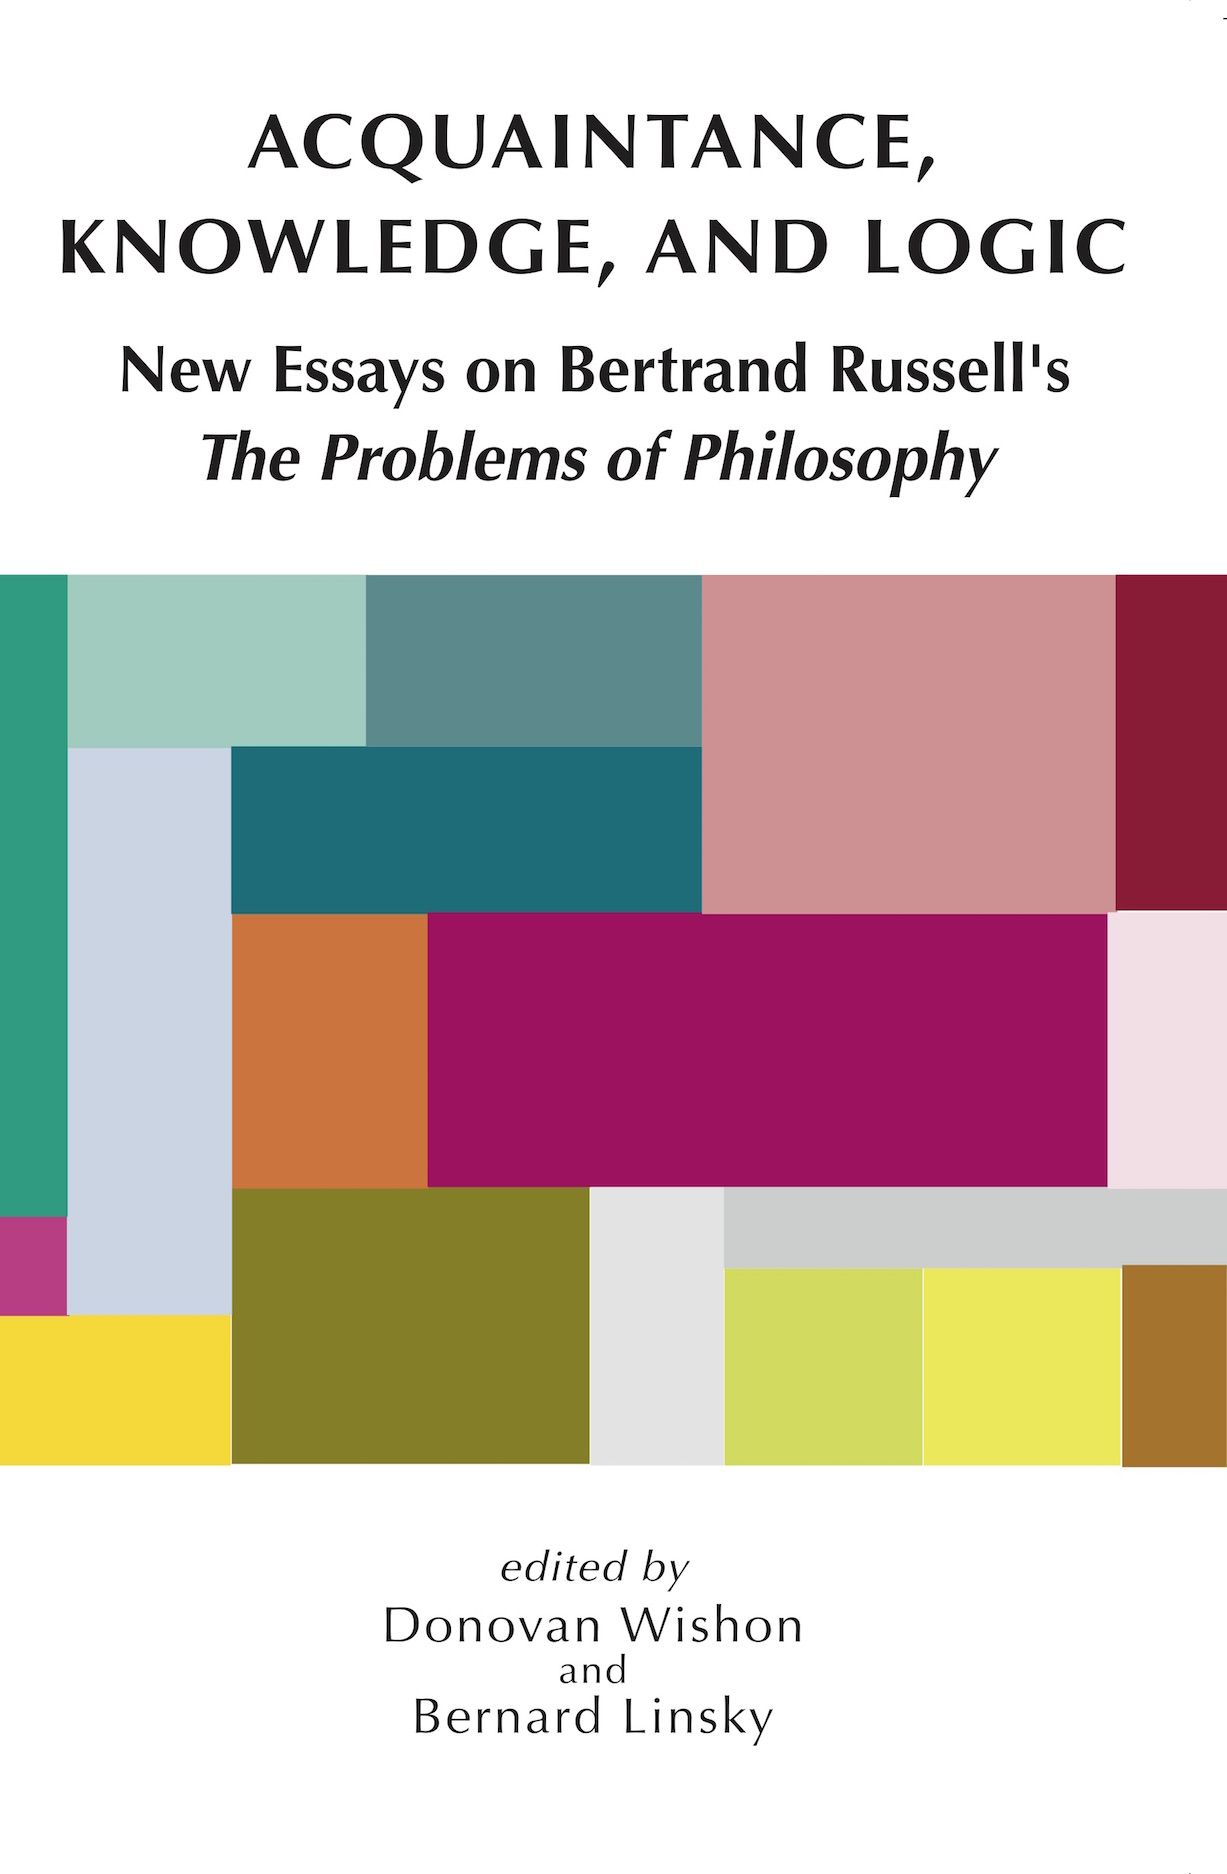 essays in analysis russell